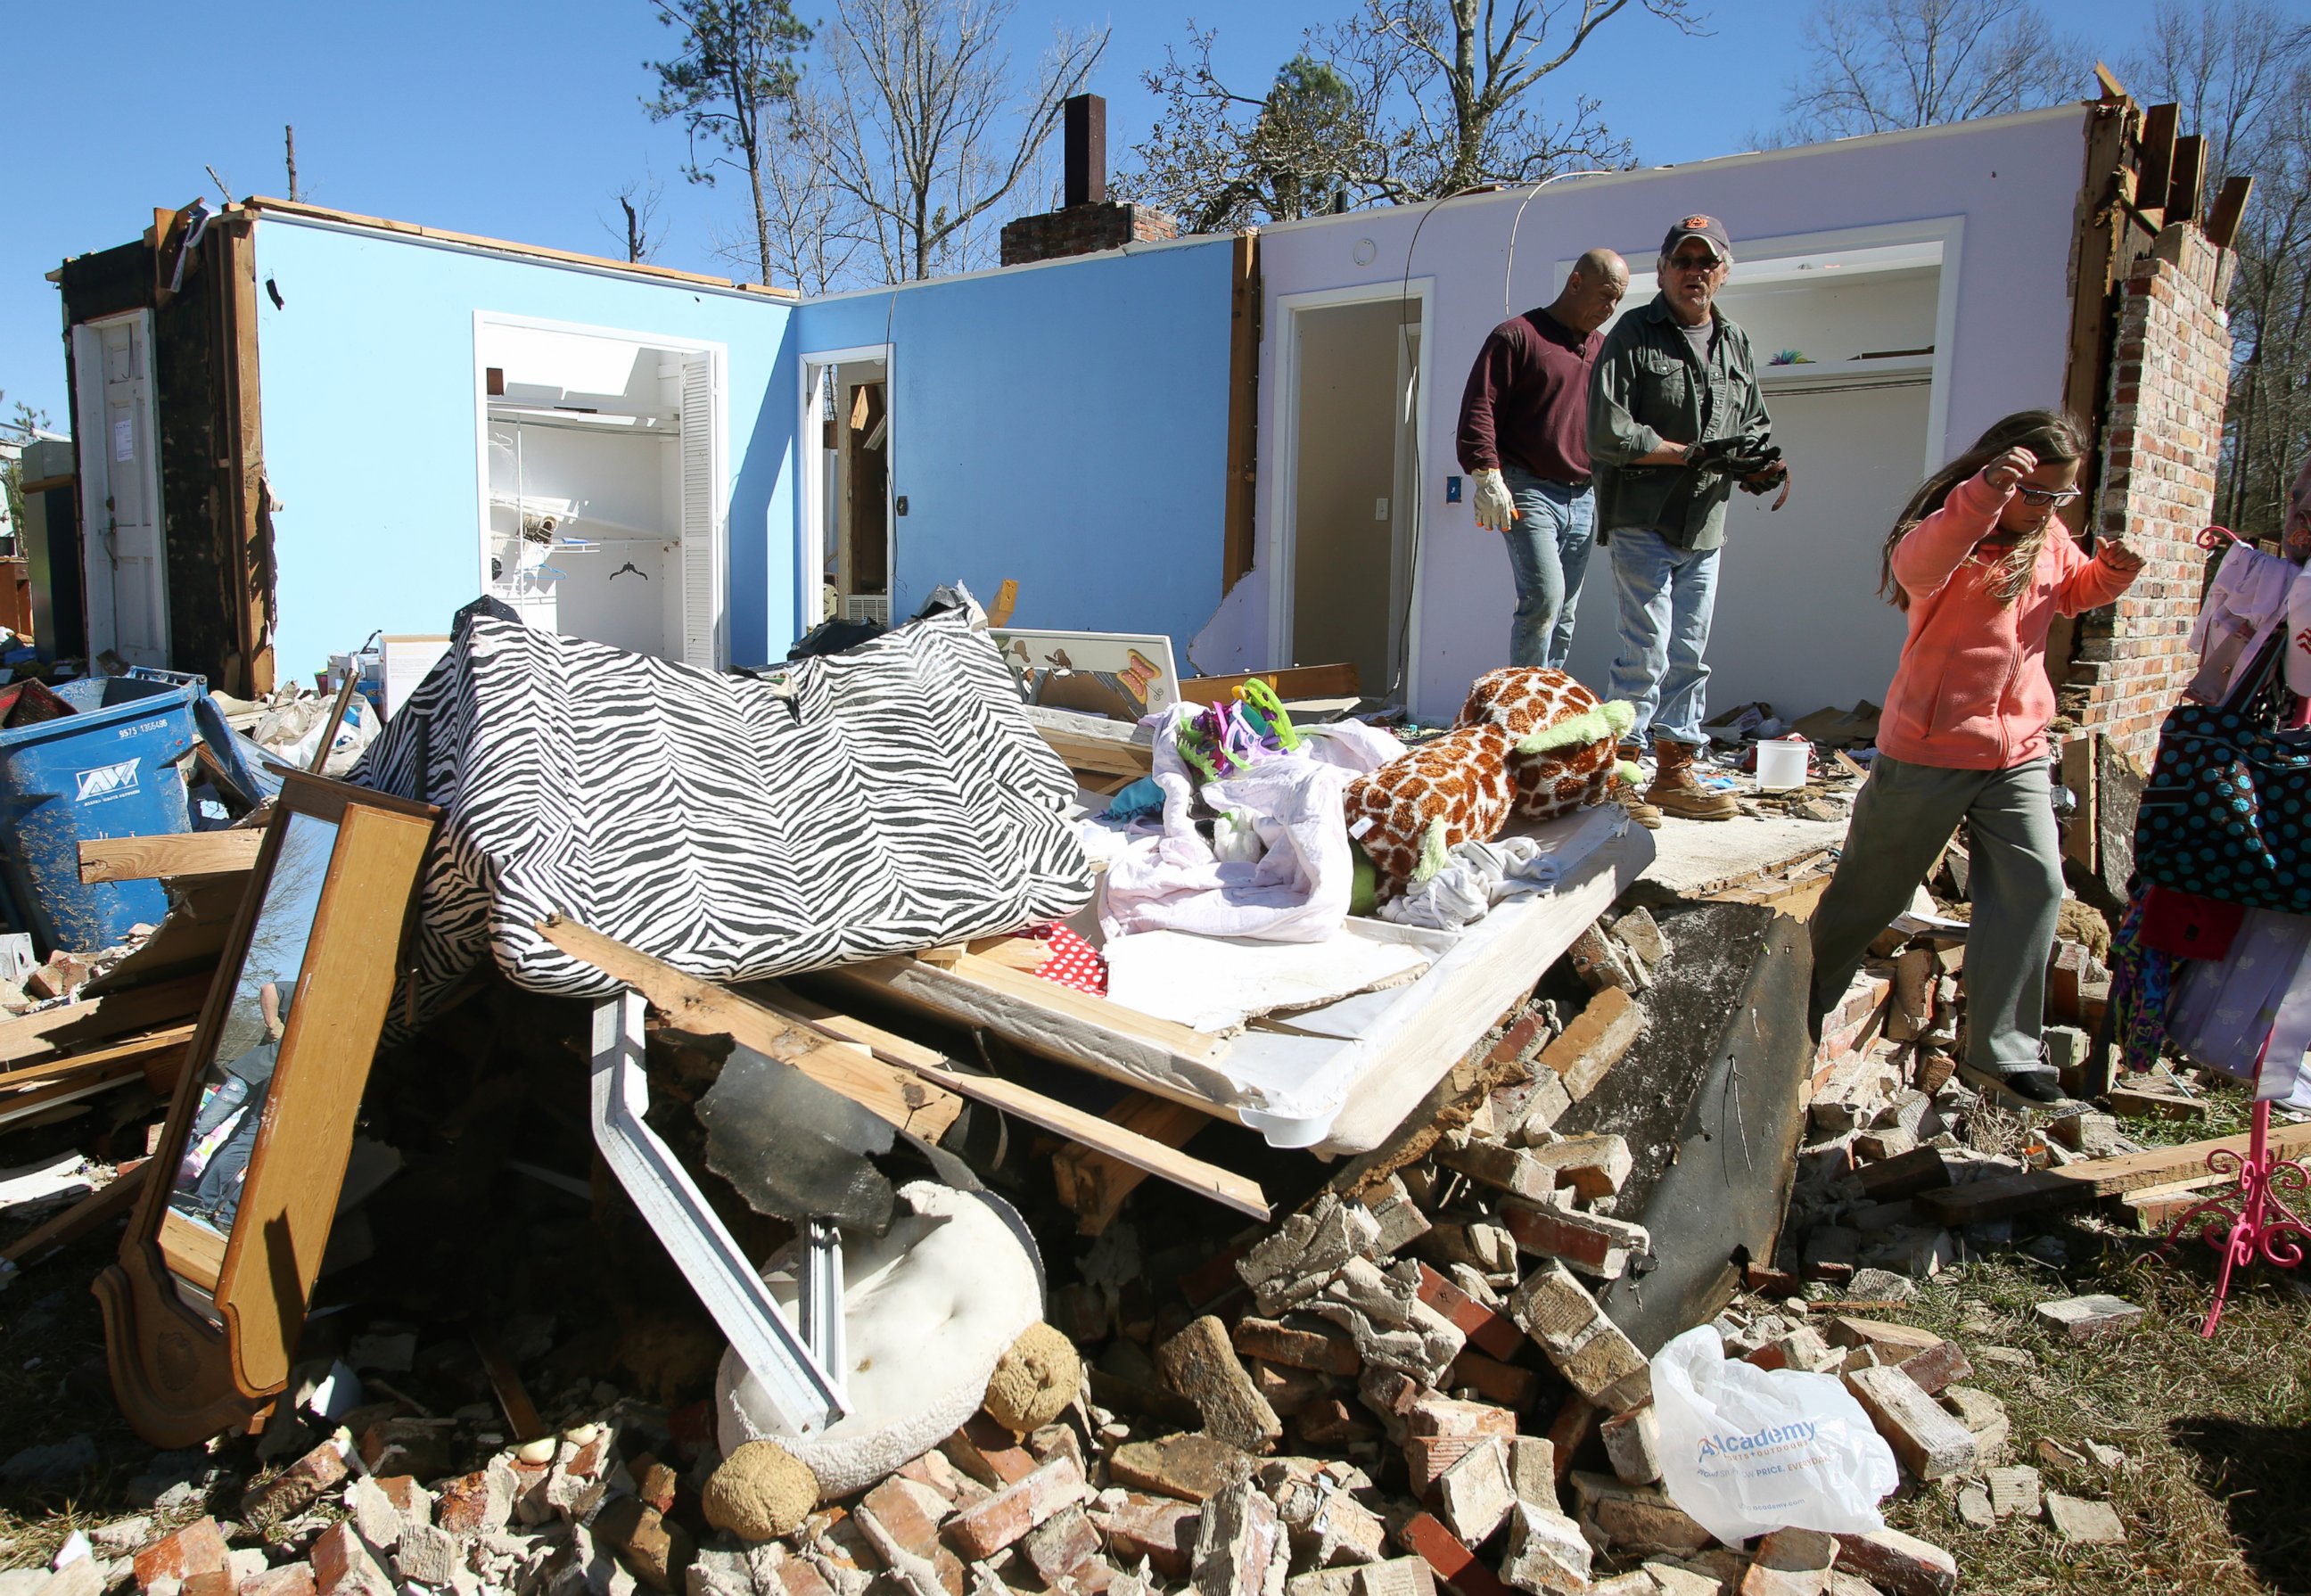 PHOTO: Residents and neighbors salvage items from the debris of a home that was damaged by severe weather that struck the prior evening in Century, Fla., Feb. 16, 2016.